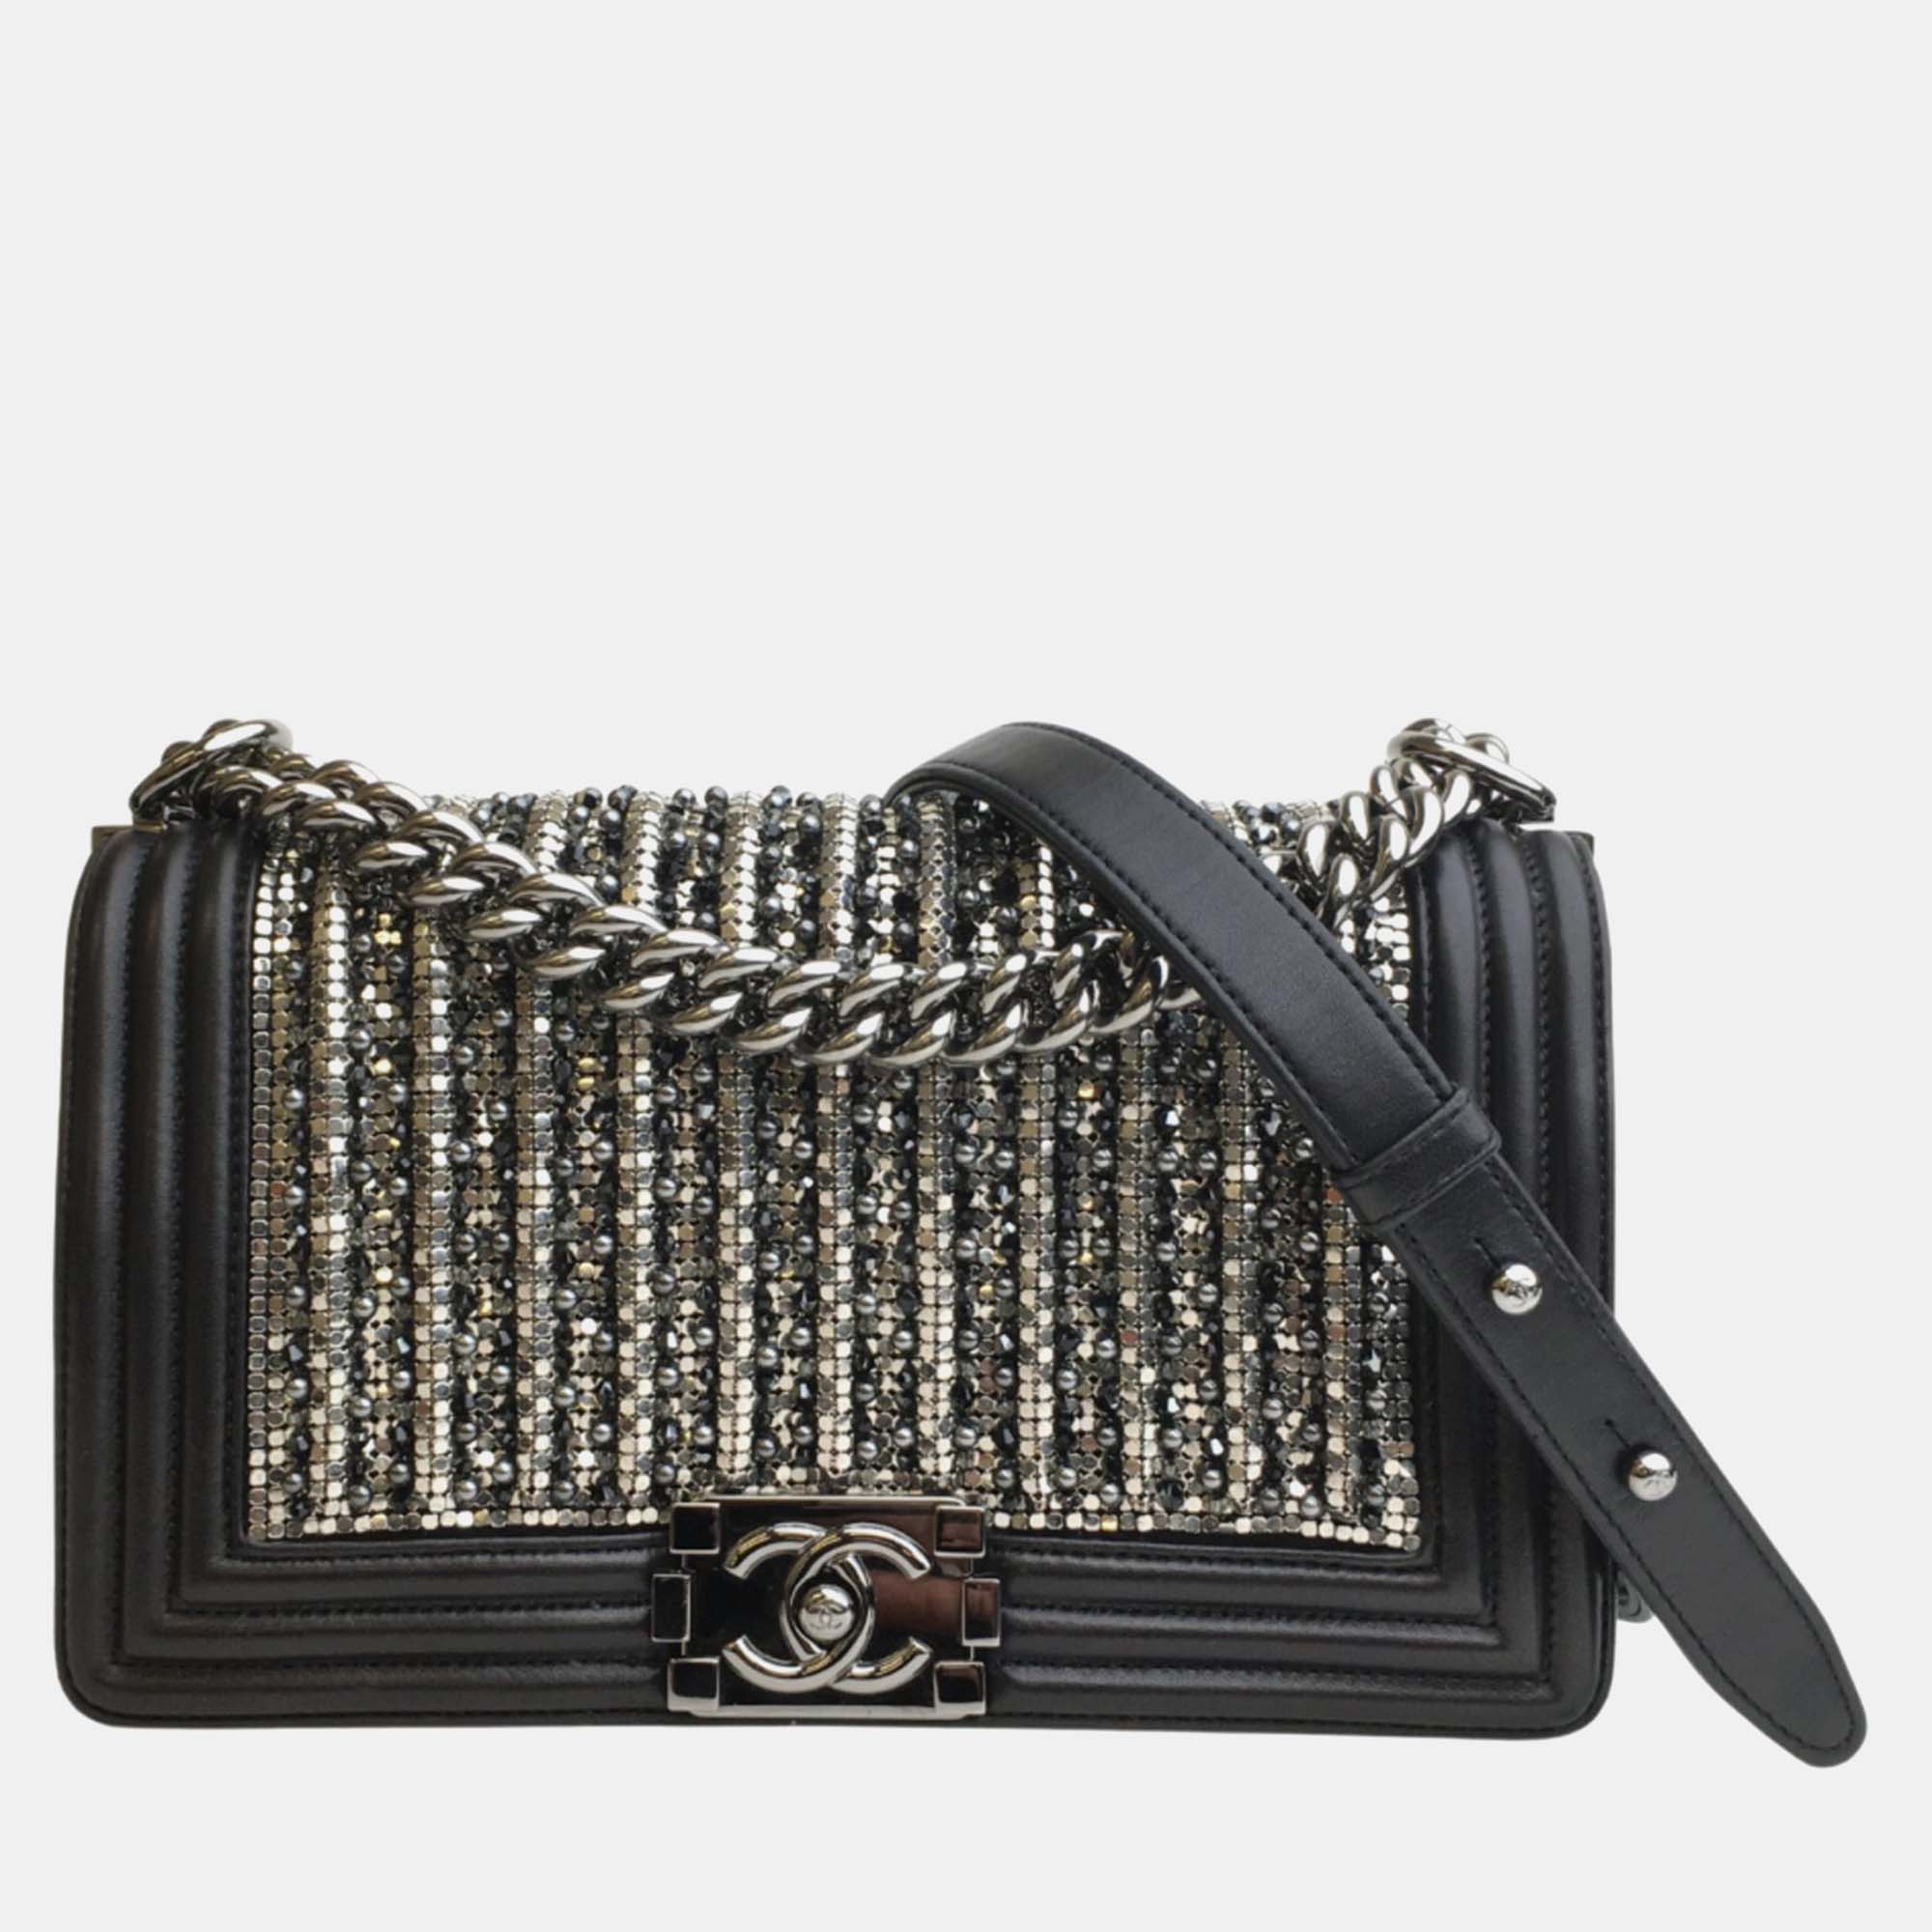 

Chanel Black Lambskin with Metallic Glass & Pearl Embroidery Small Boy Flap Bag